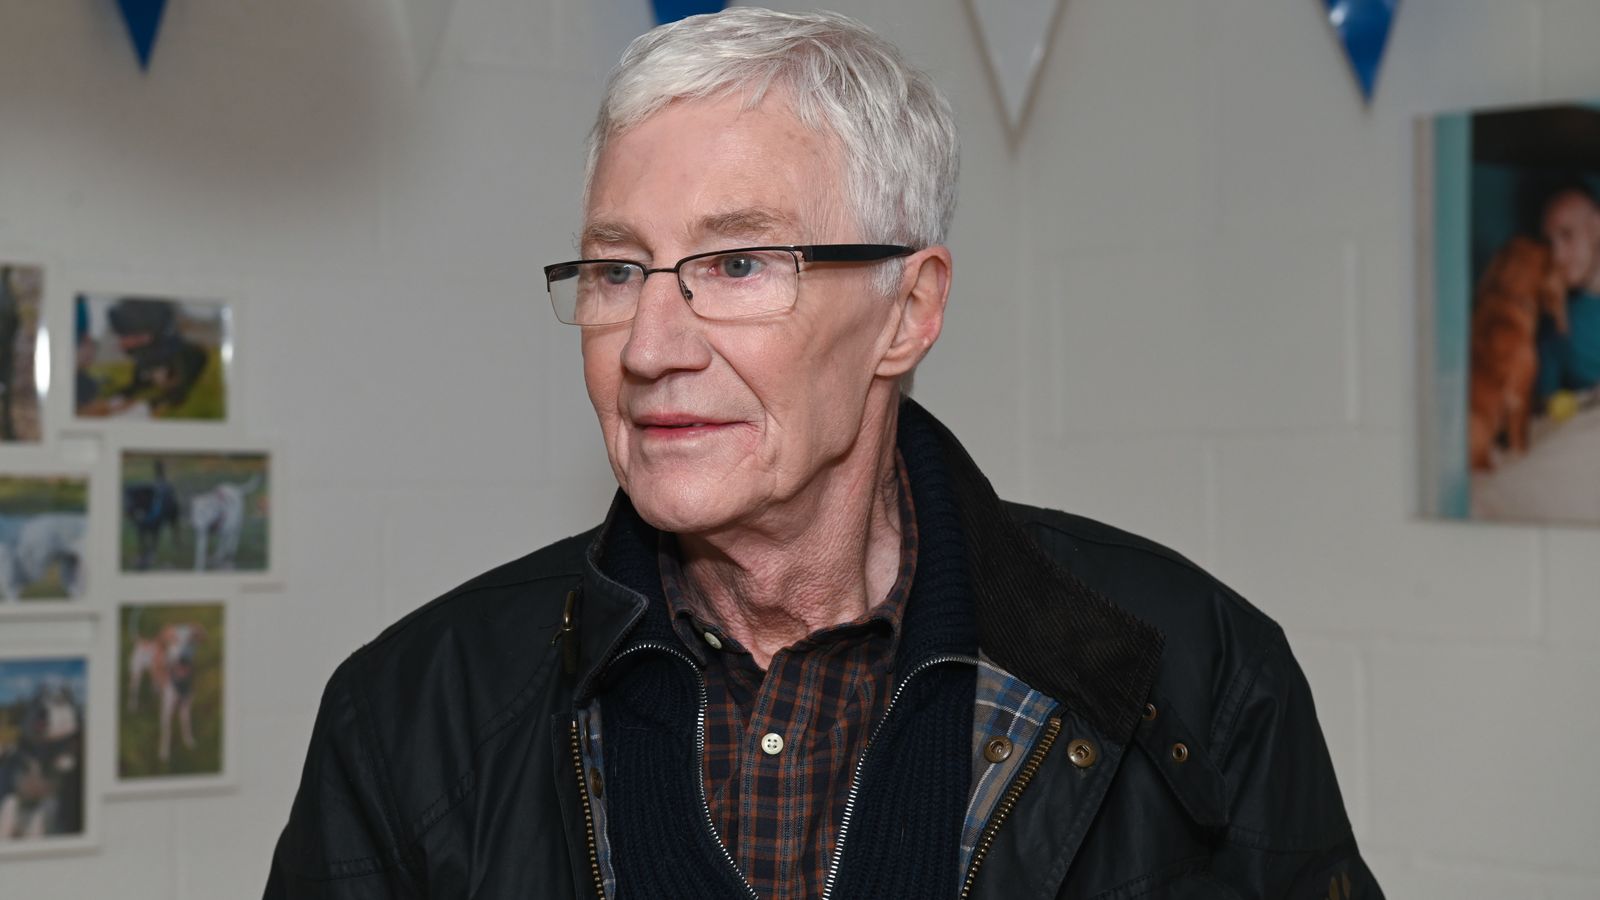 TV star and comedian Paul O'Grady has died at the age of 67